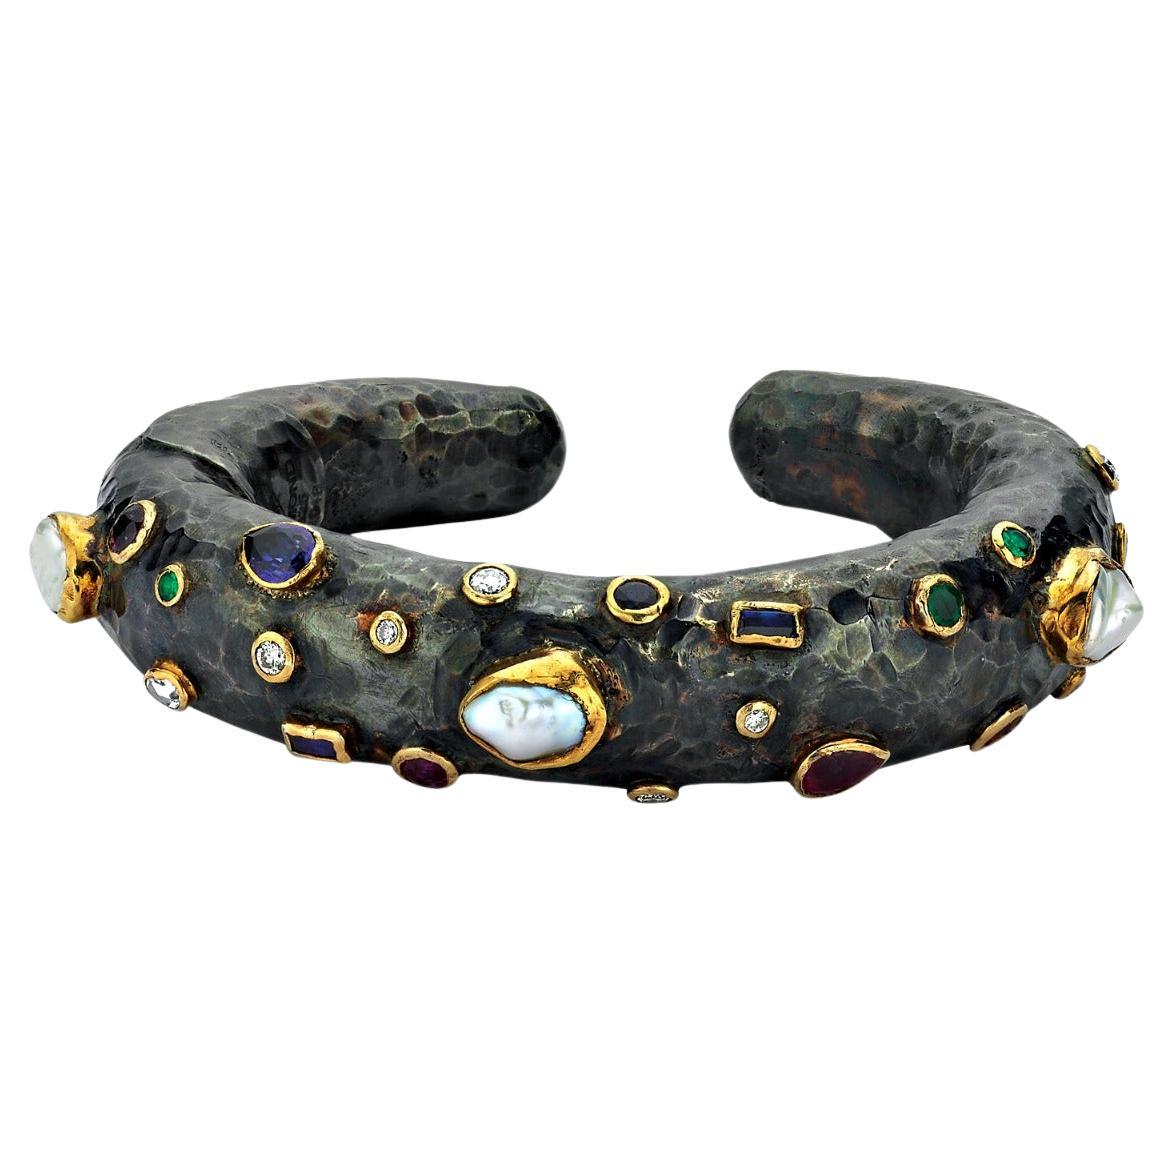 Oxidised Silver and 24k Gold Celles Cuff Bangle with Diamonds